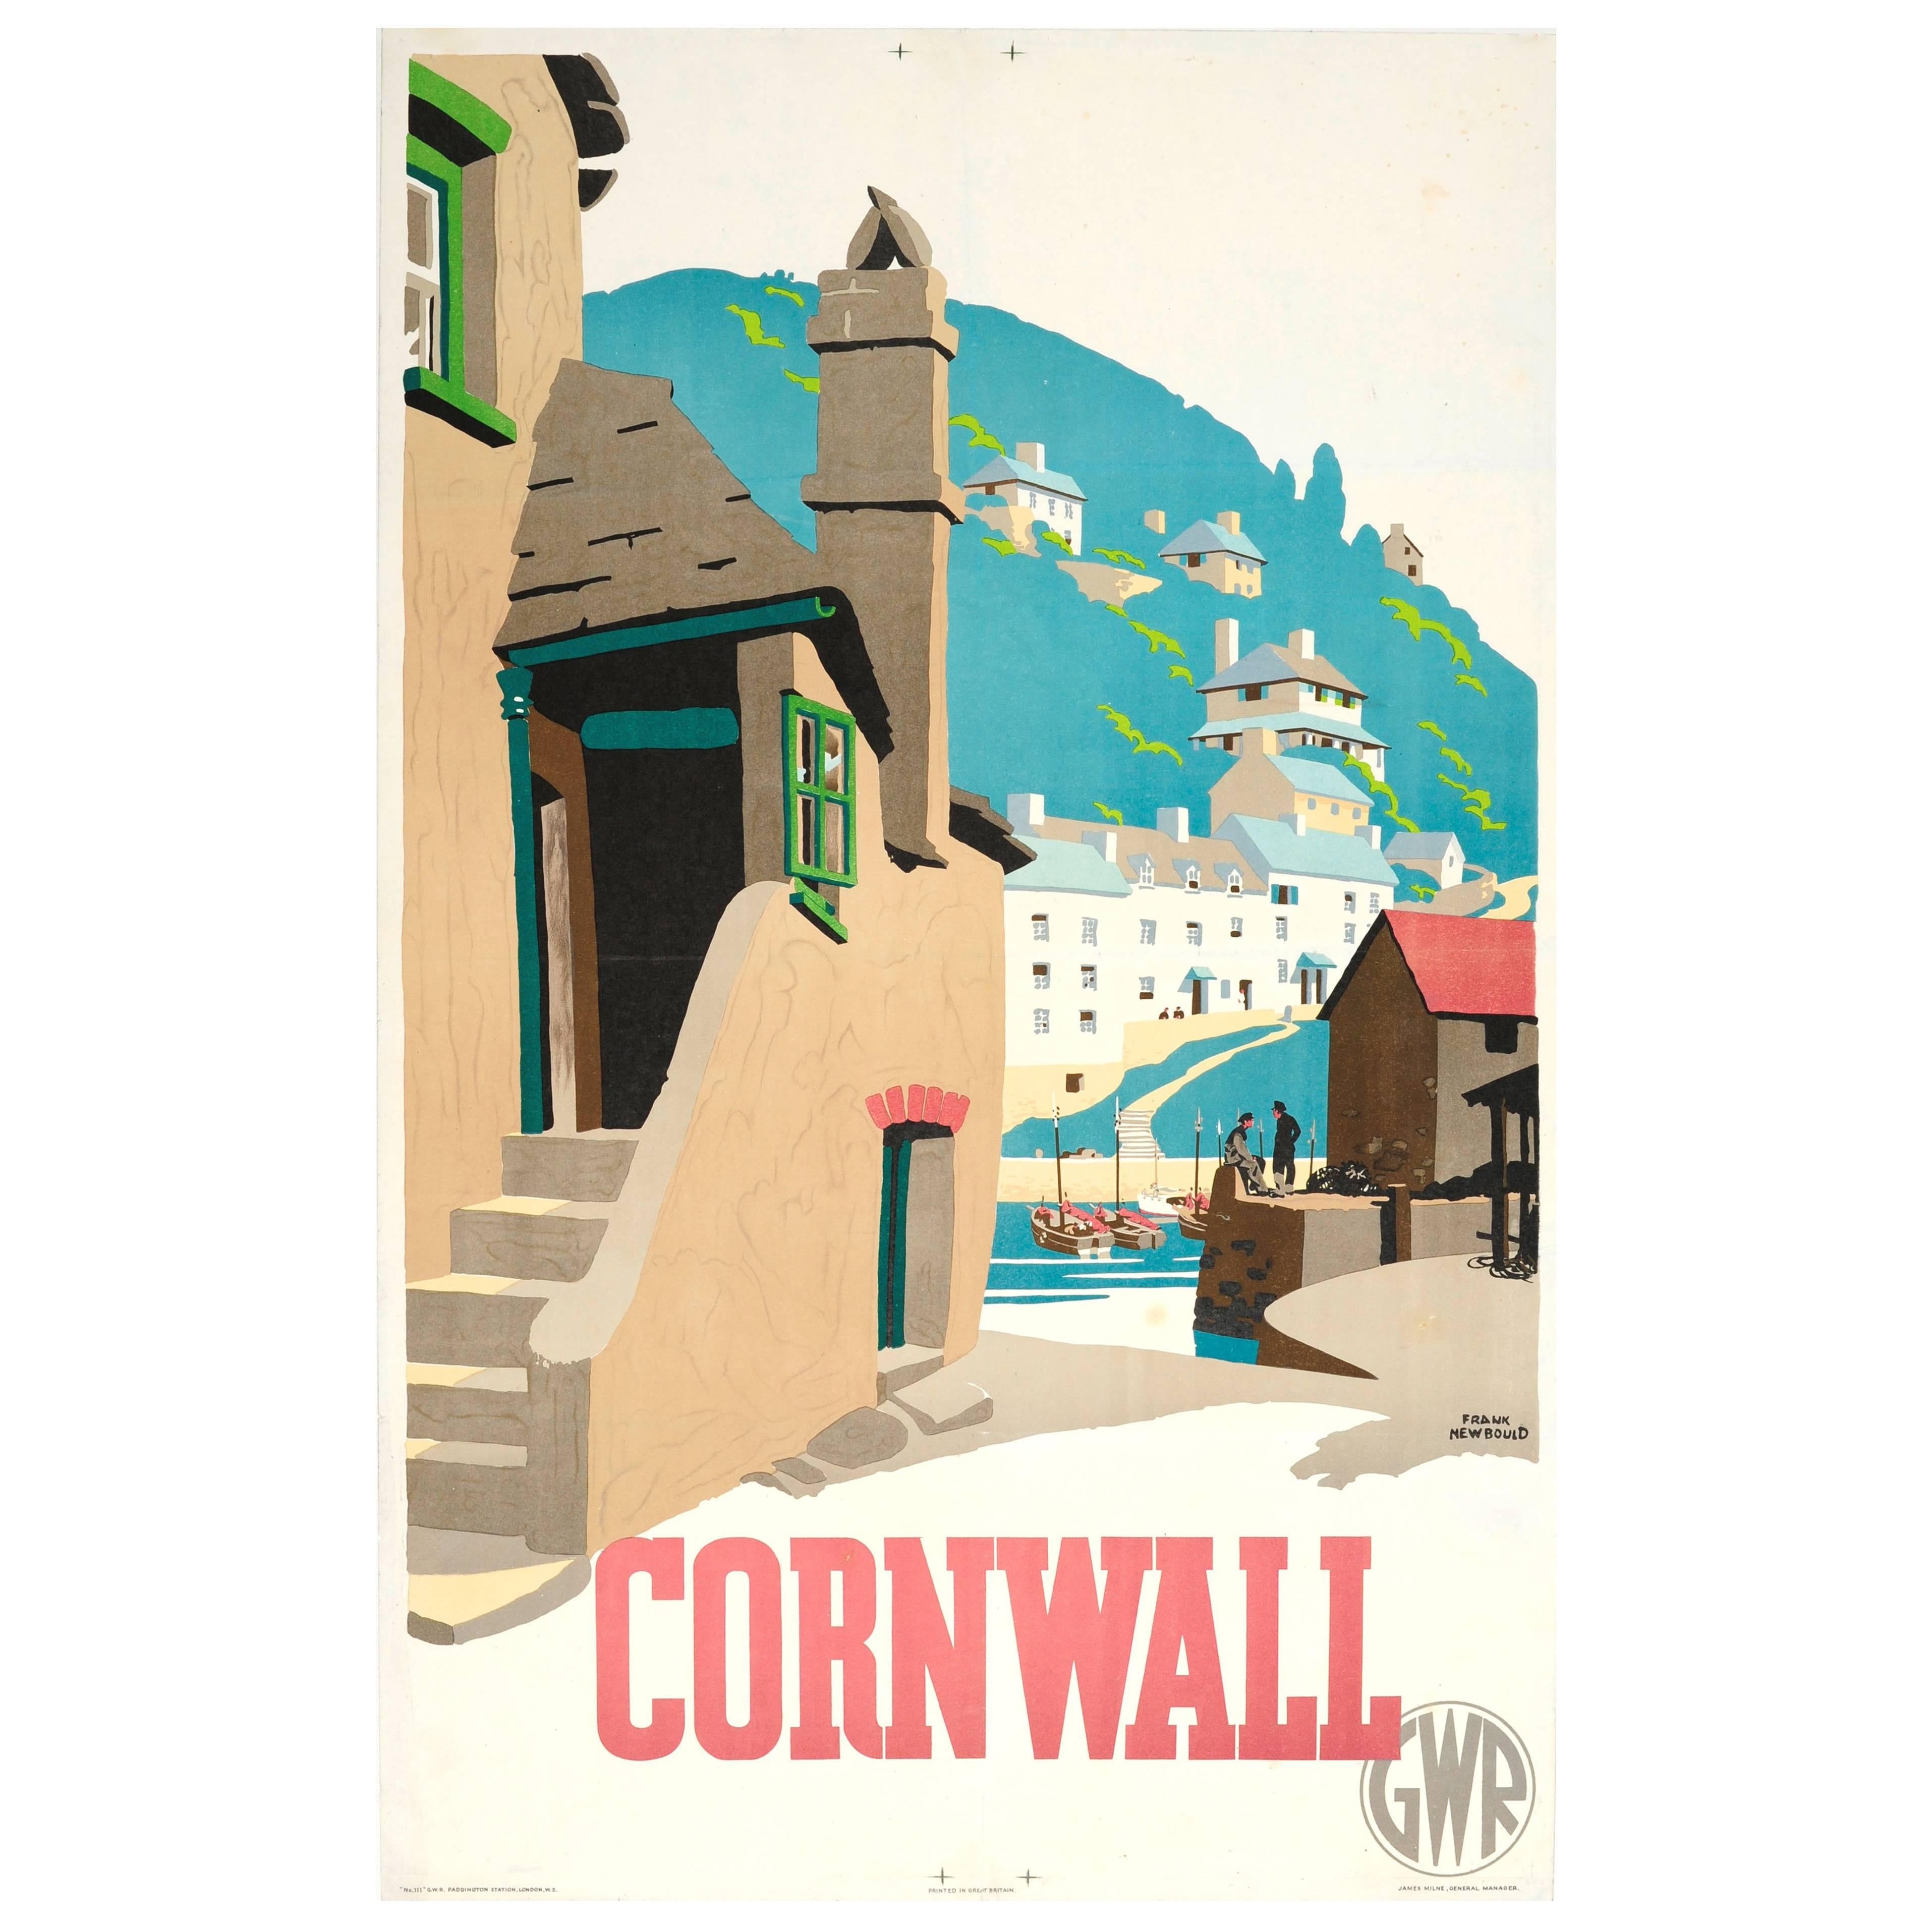 1936 Great Western Railway Poster by Frank Newbould for Cornwall, GWR